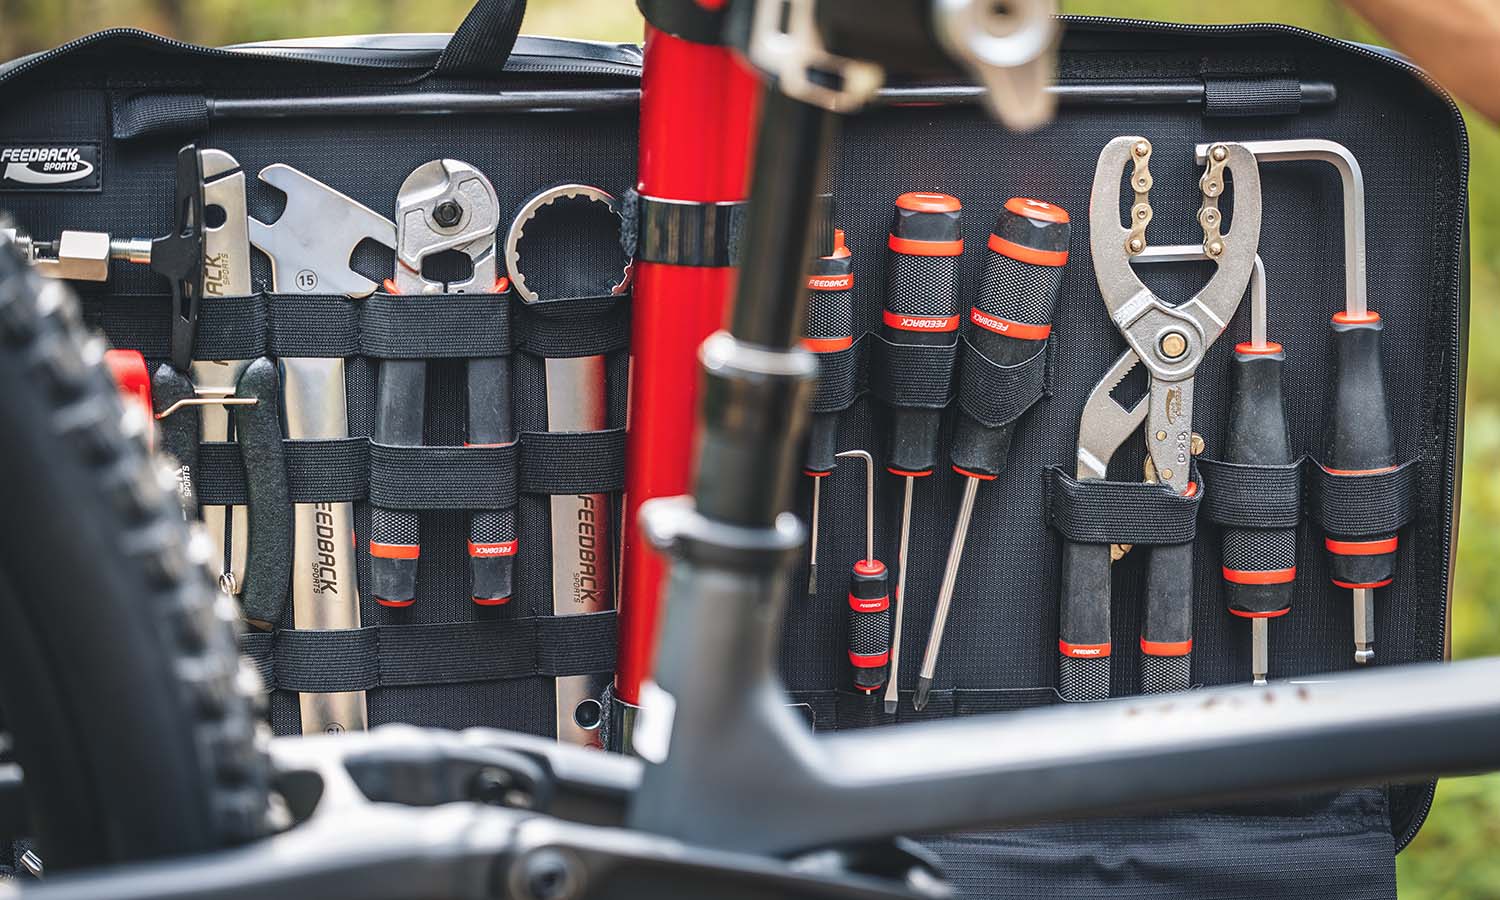 Close up of a bicycle tool case mounted on a bike repair stand.